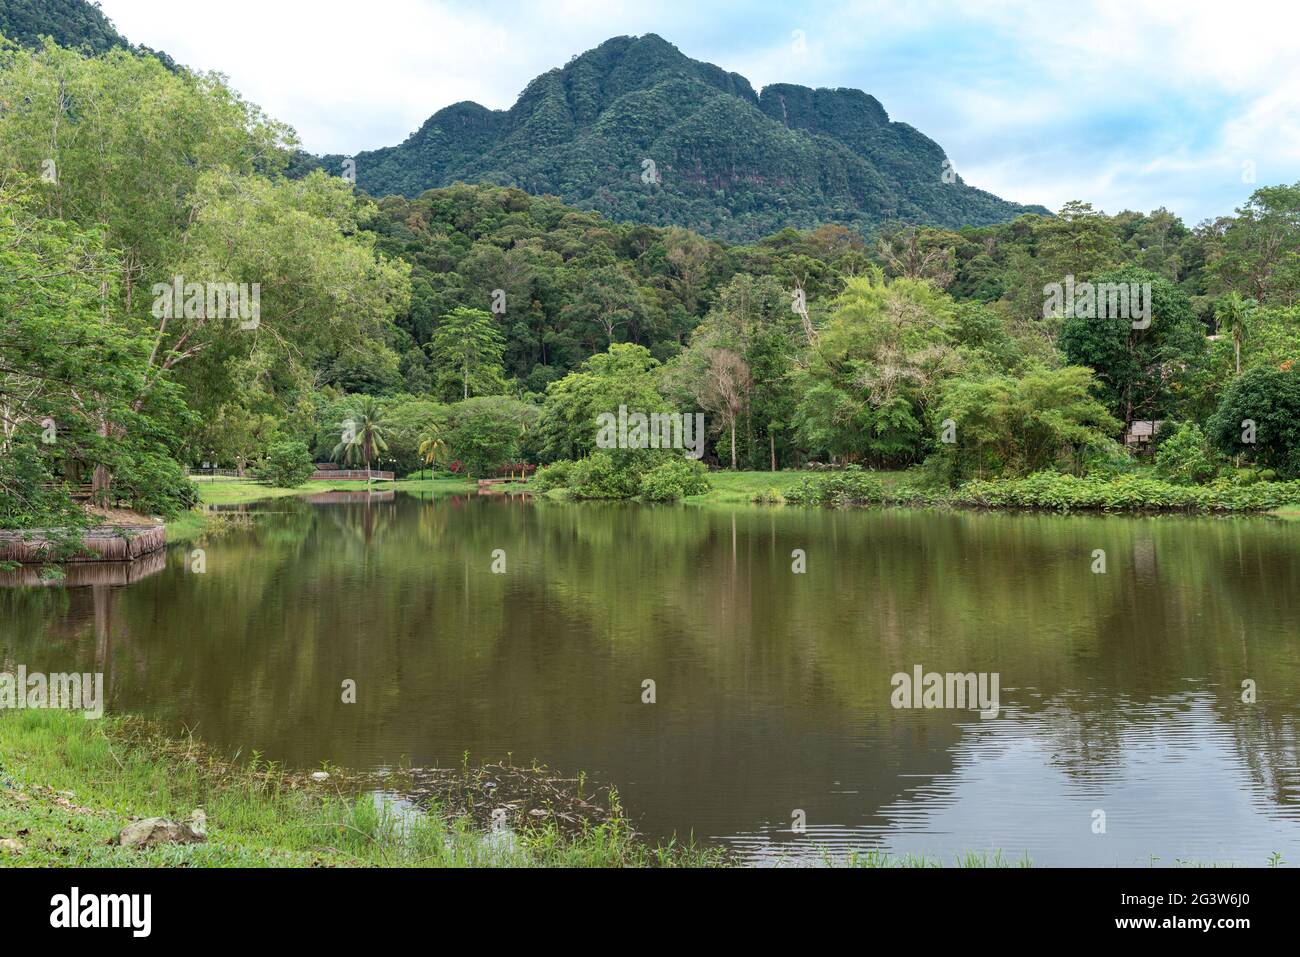 The Sarawak Cultural Village at the foot of Mount Santubong on Borneo Stock Photo